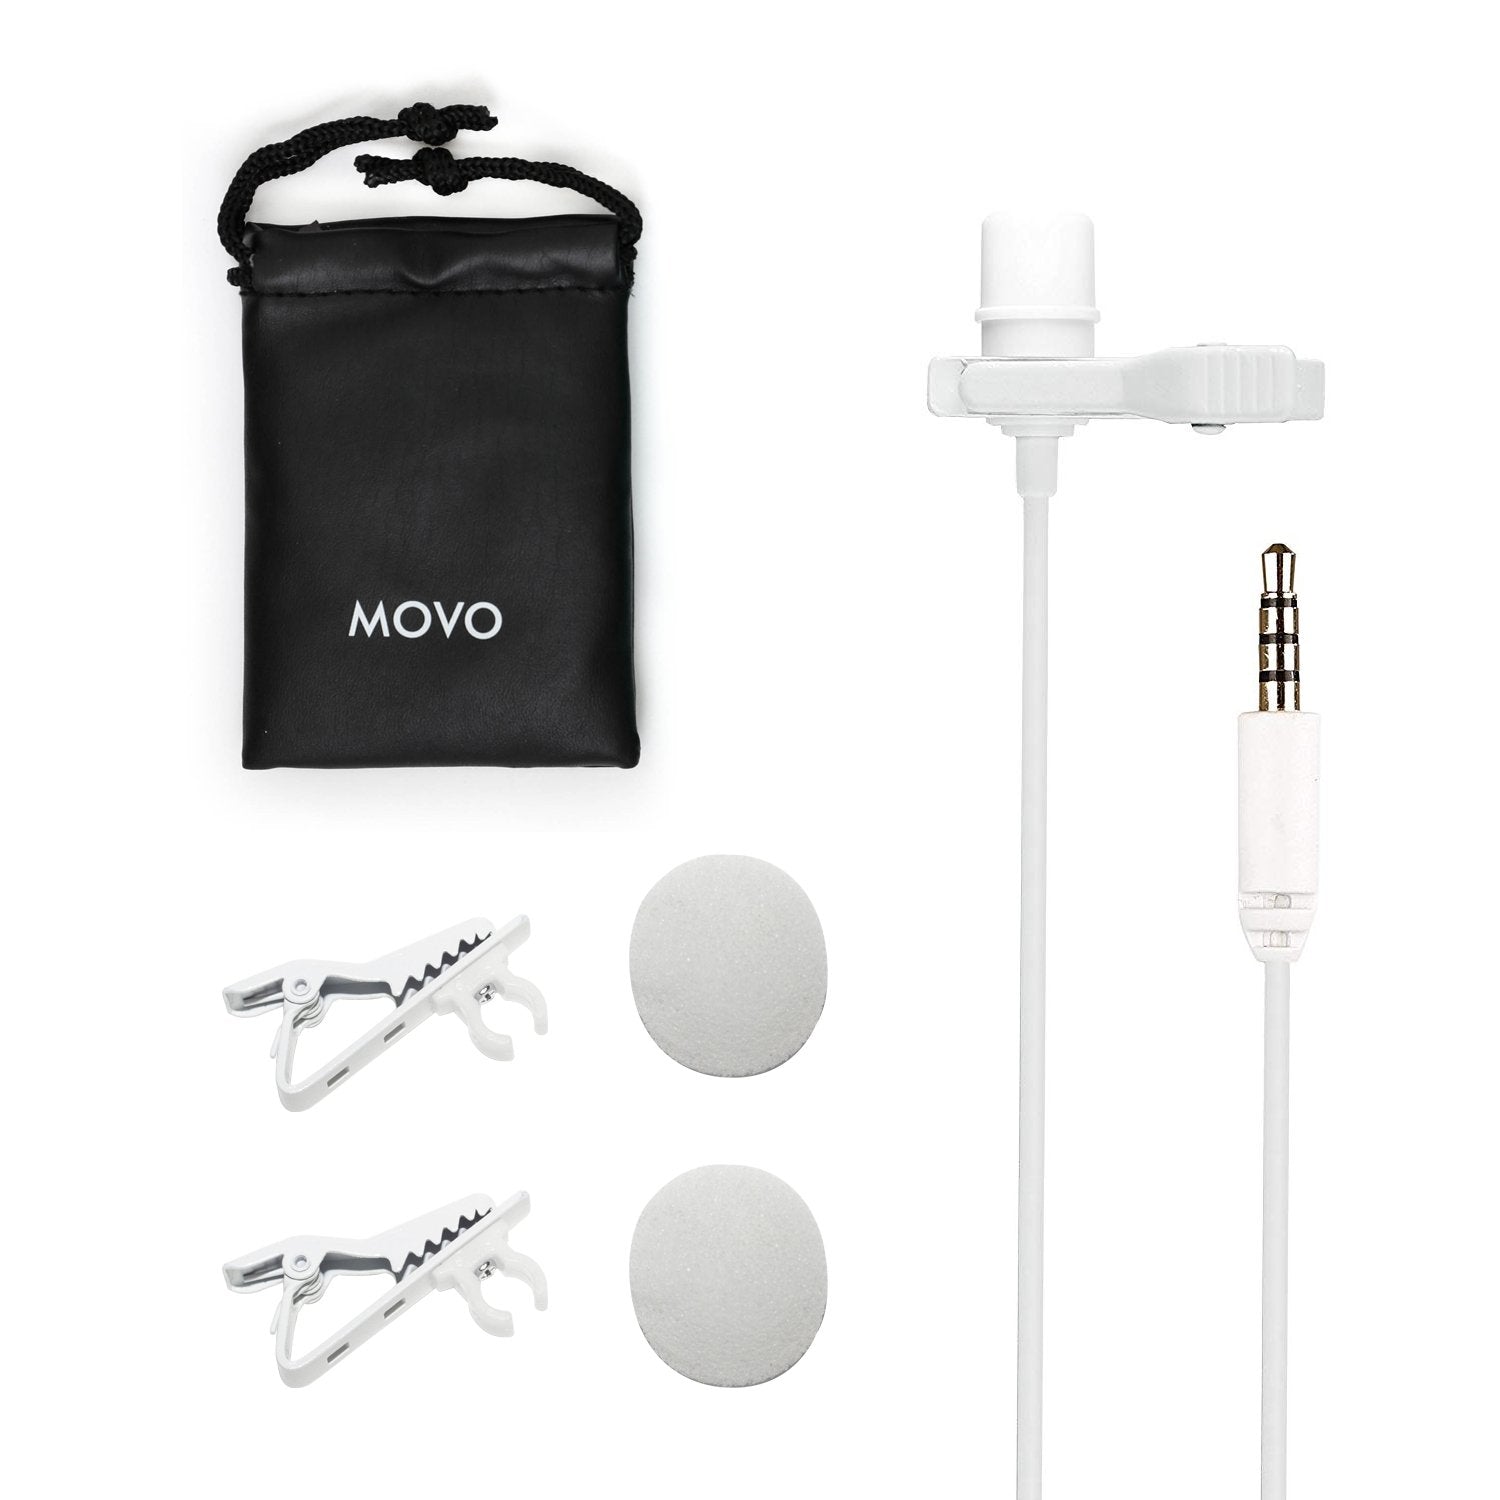 Movo PM10 | Black or White Lavalier Movo Microphone for Smartphones - Movo